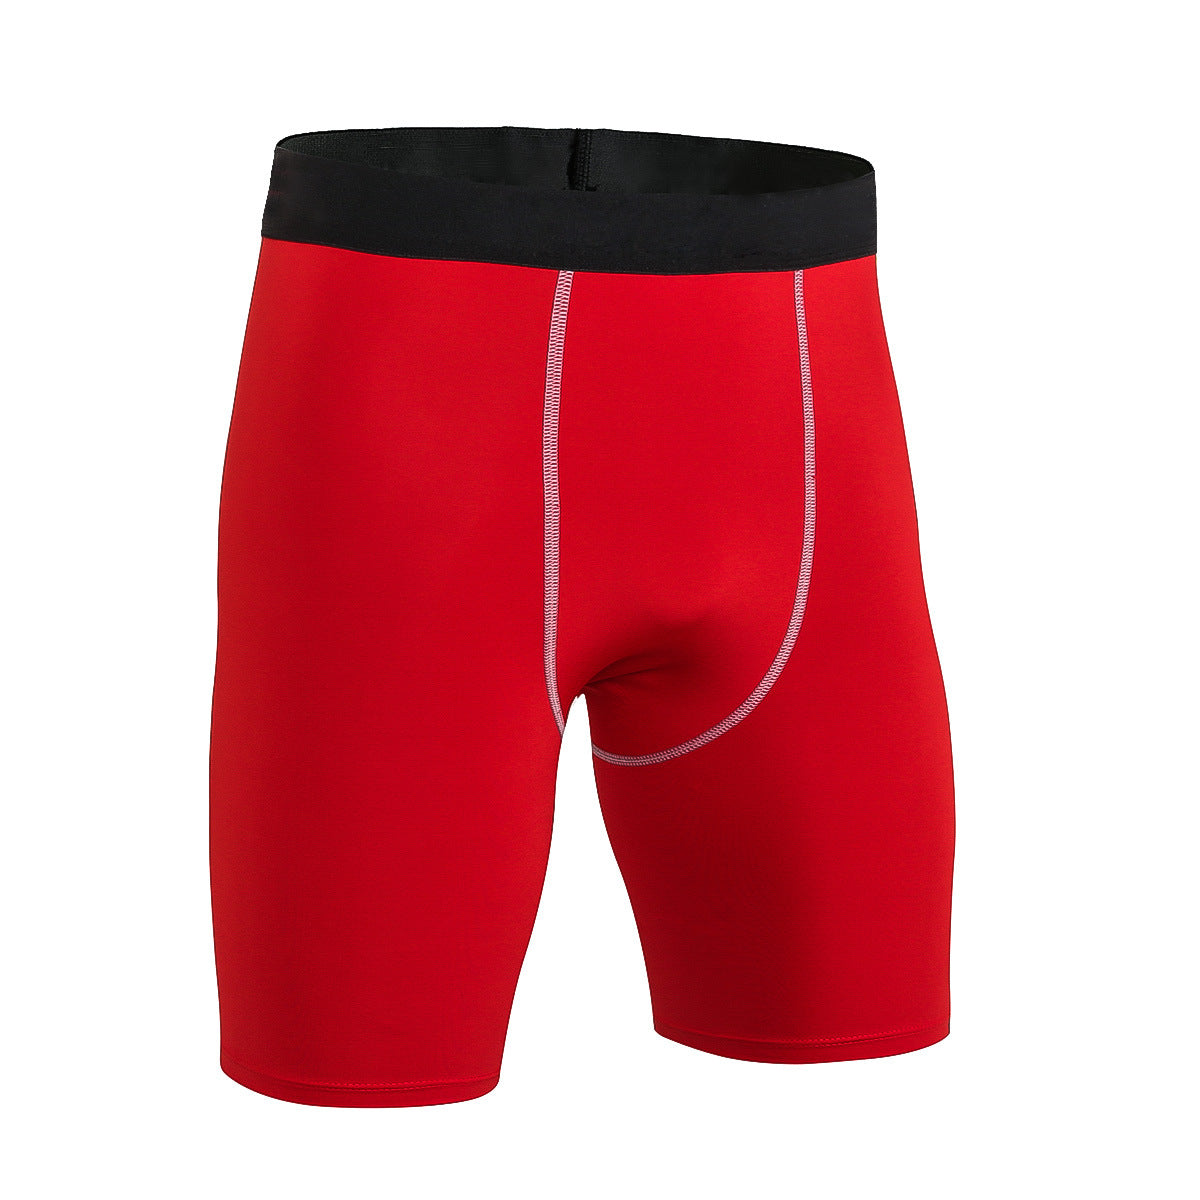 Men's Tight PRO Shorts High Spring Fast Dry Compression Shorts 7 color 1004